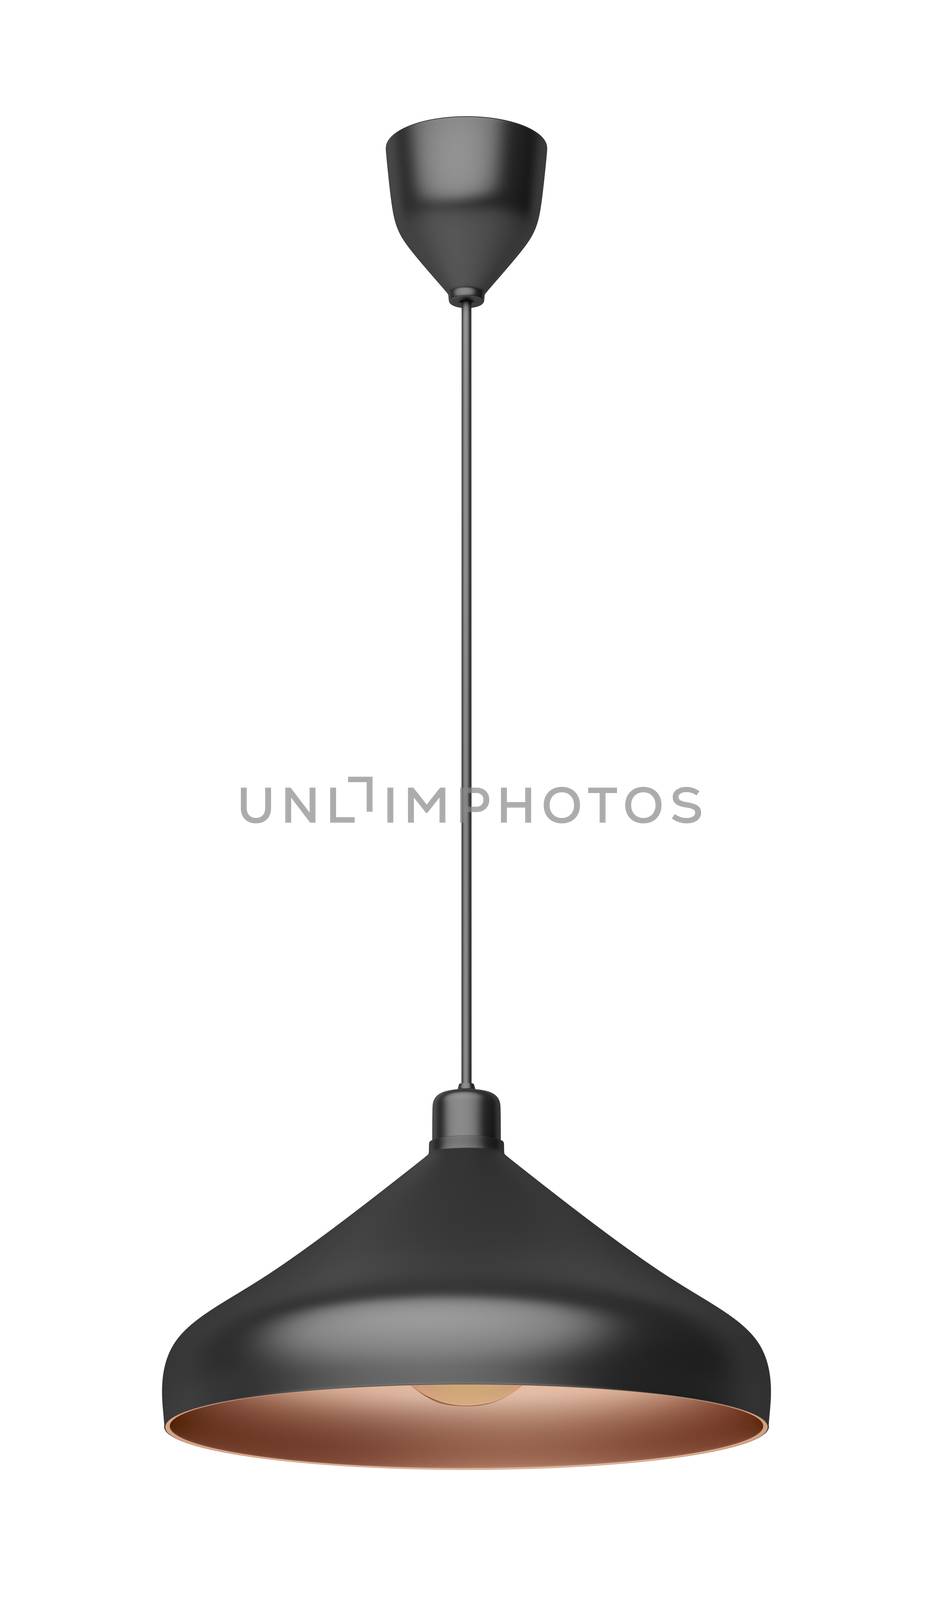 Modern pendant lamp with LED bulb, isolated on white background
